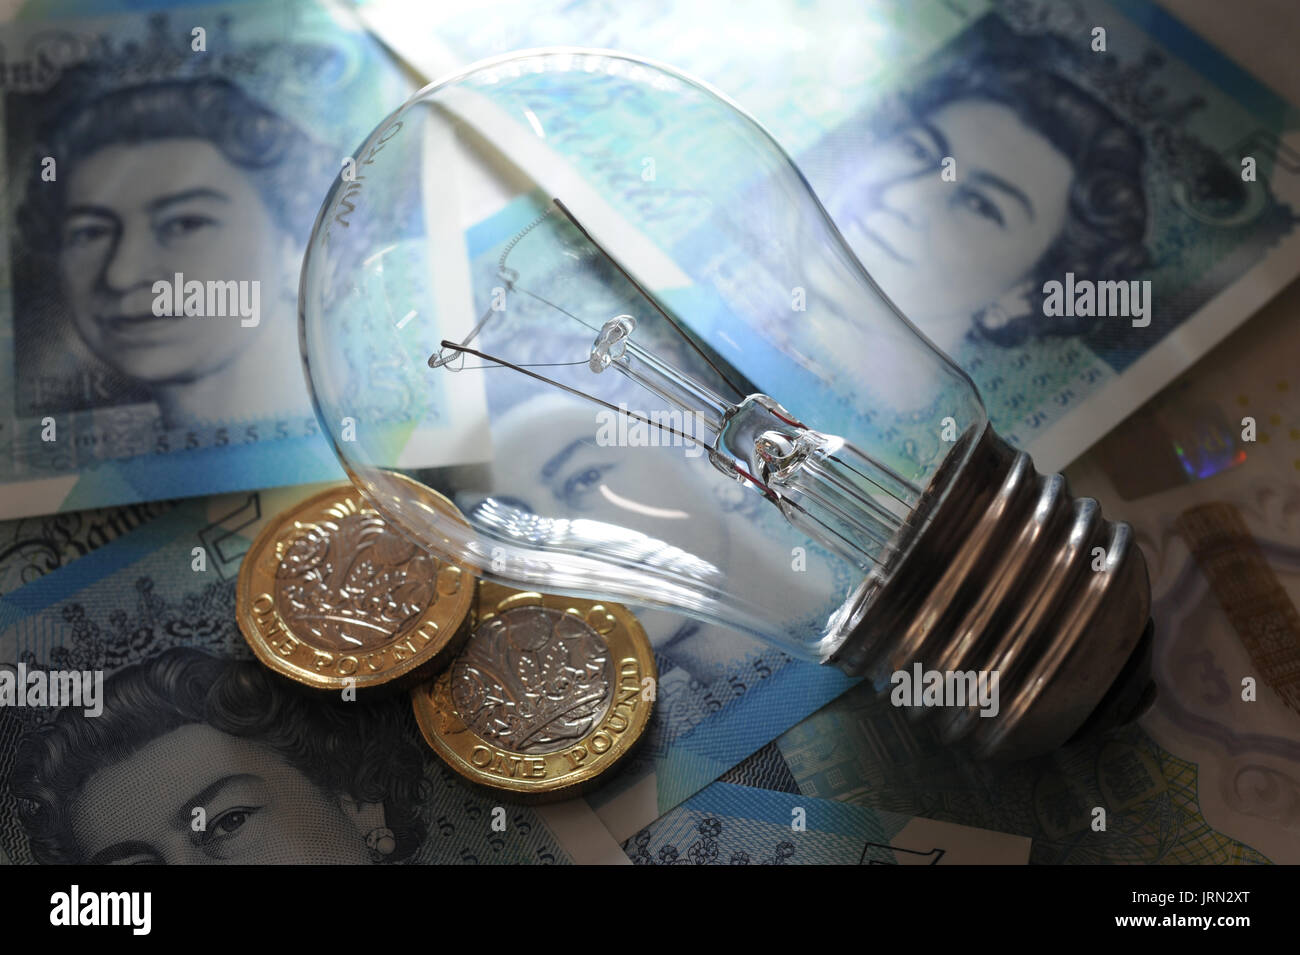 ELECTRIC LIGHT BULB WITH BRITISH MONEY RE ENERGY PRICES ELECTRICITY SUPPLIERS RISING FUEL COSTS HOUSEHOLD BUDGETS UK Stock Photo